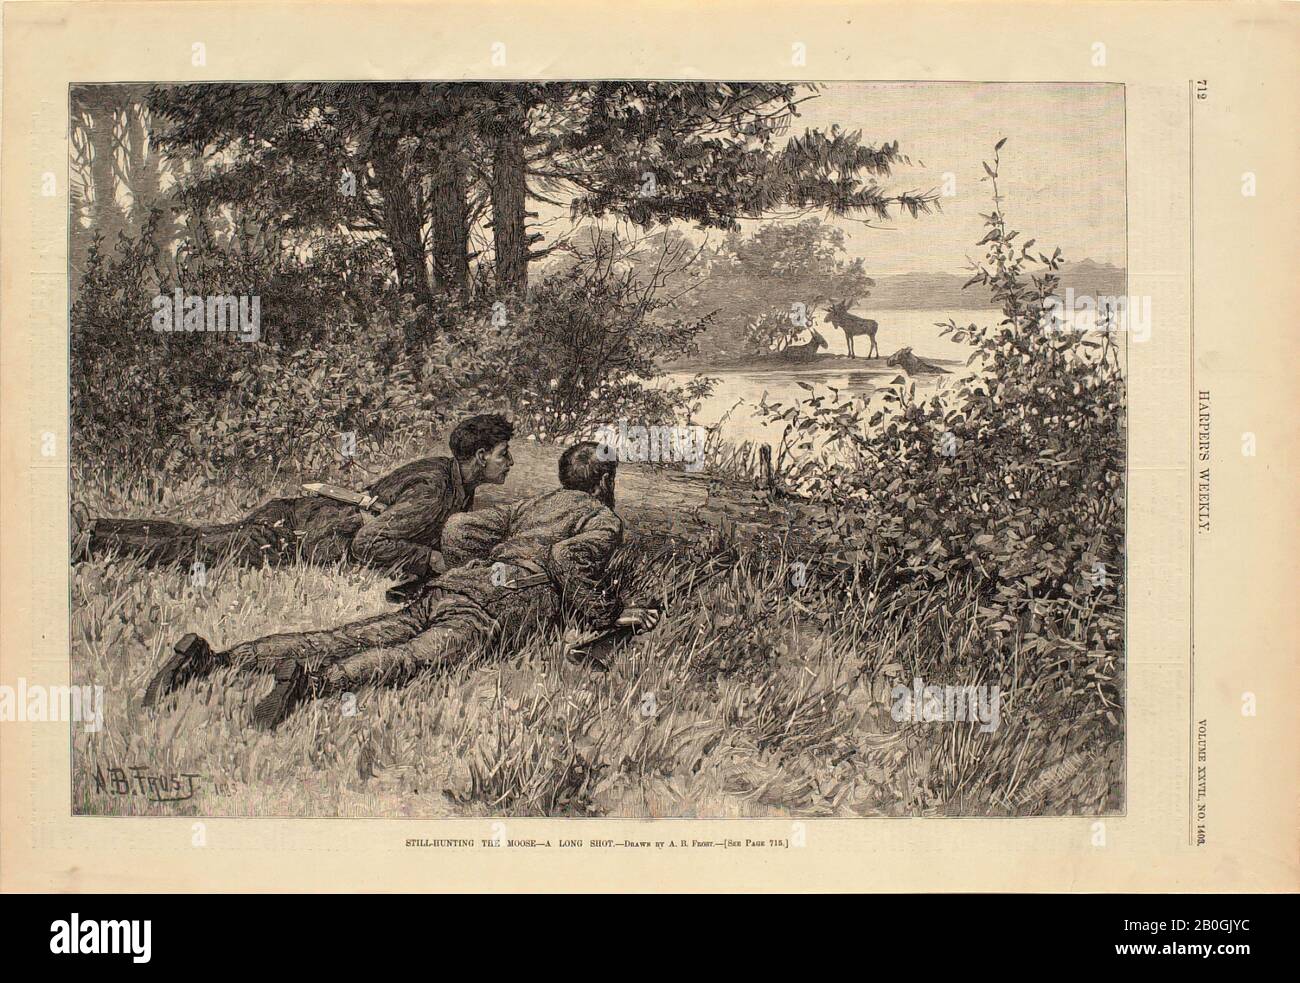 Wimmermann, American, 18th century, Arthur Burdett Frost I, (American, 1851–1928), Still-Hunting the Moose—A Long Shot, 1883, Wood engraving on paper, image: 9 x 12 15/16 in. (22.8 x 32.9 cm Stock Photo